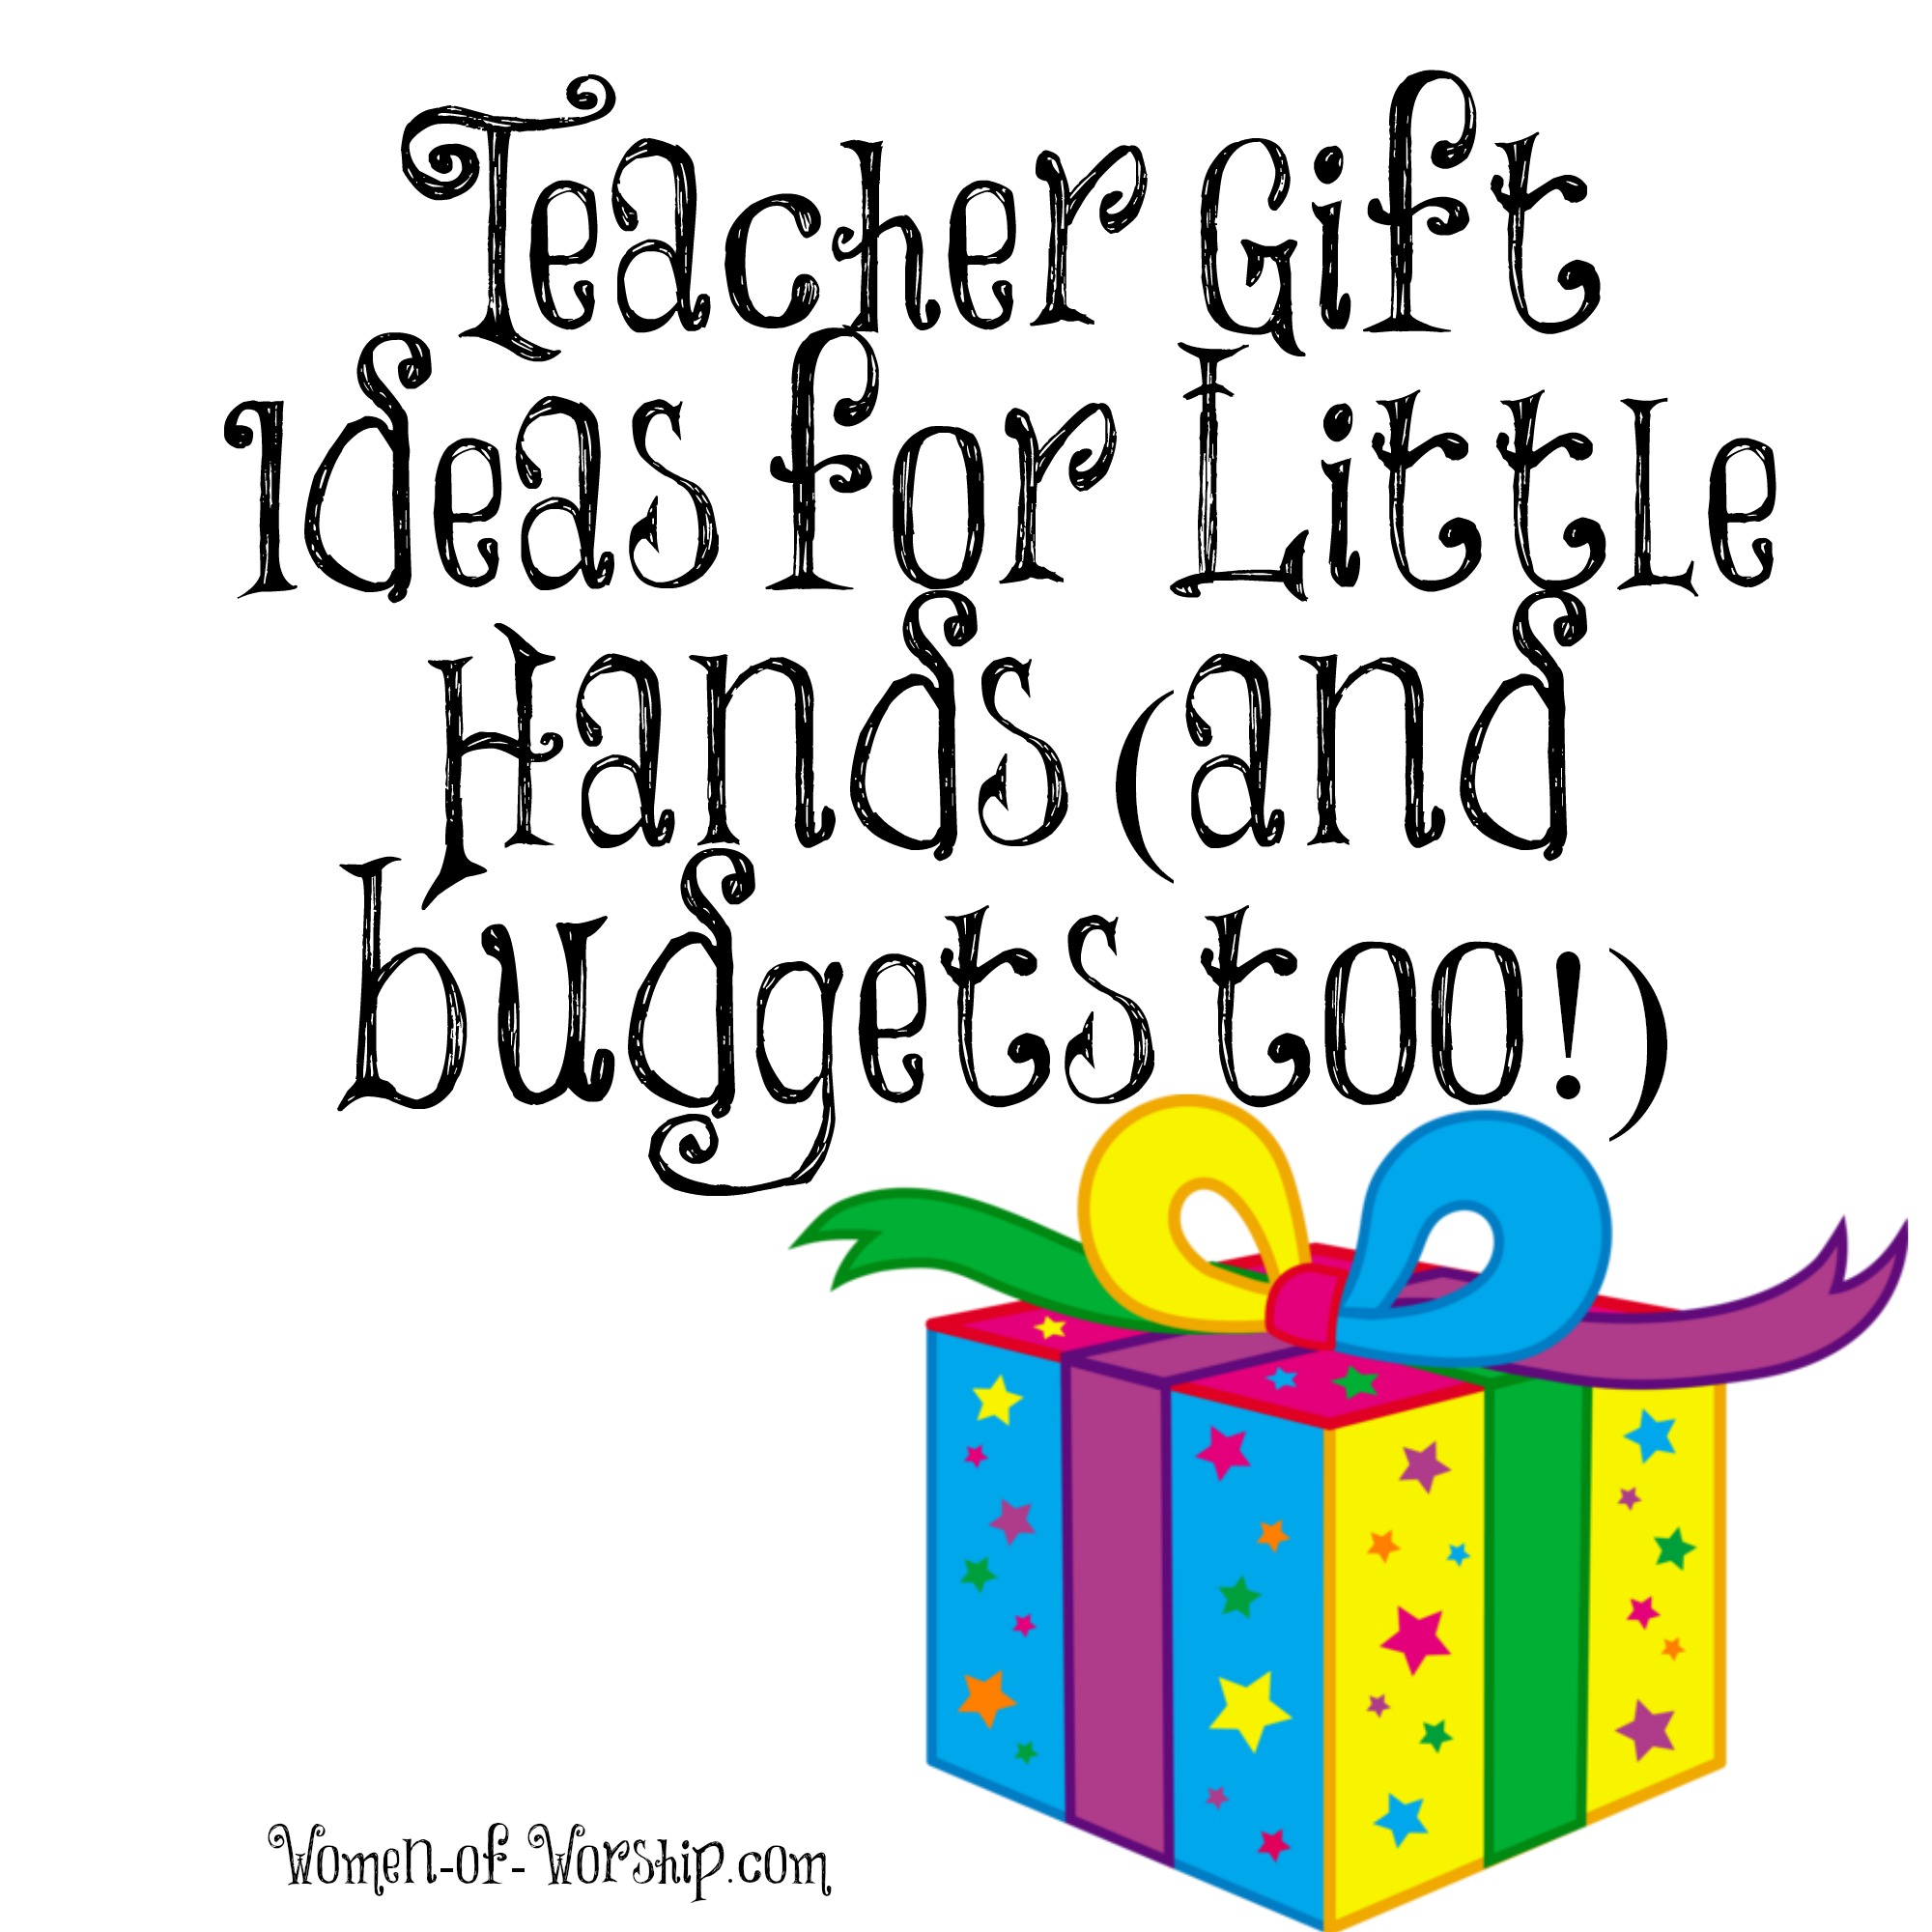 Teacher Gifts  Ideas For Little Hands  And Budgets Too     Worshipful    